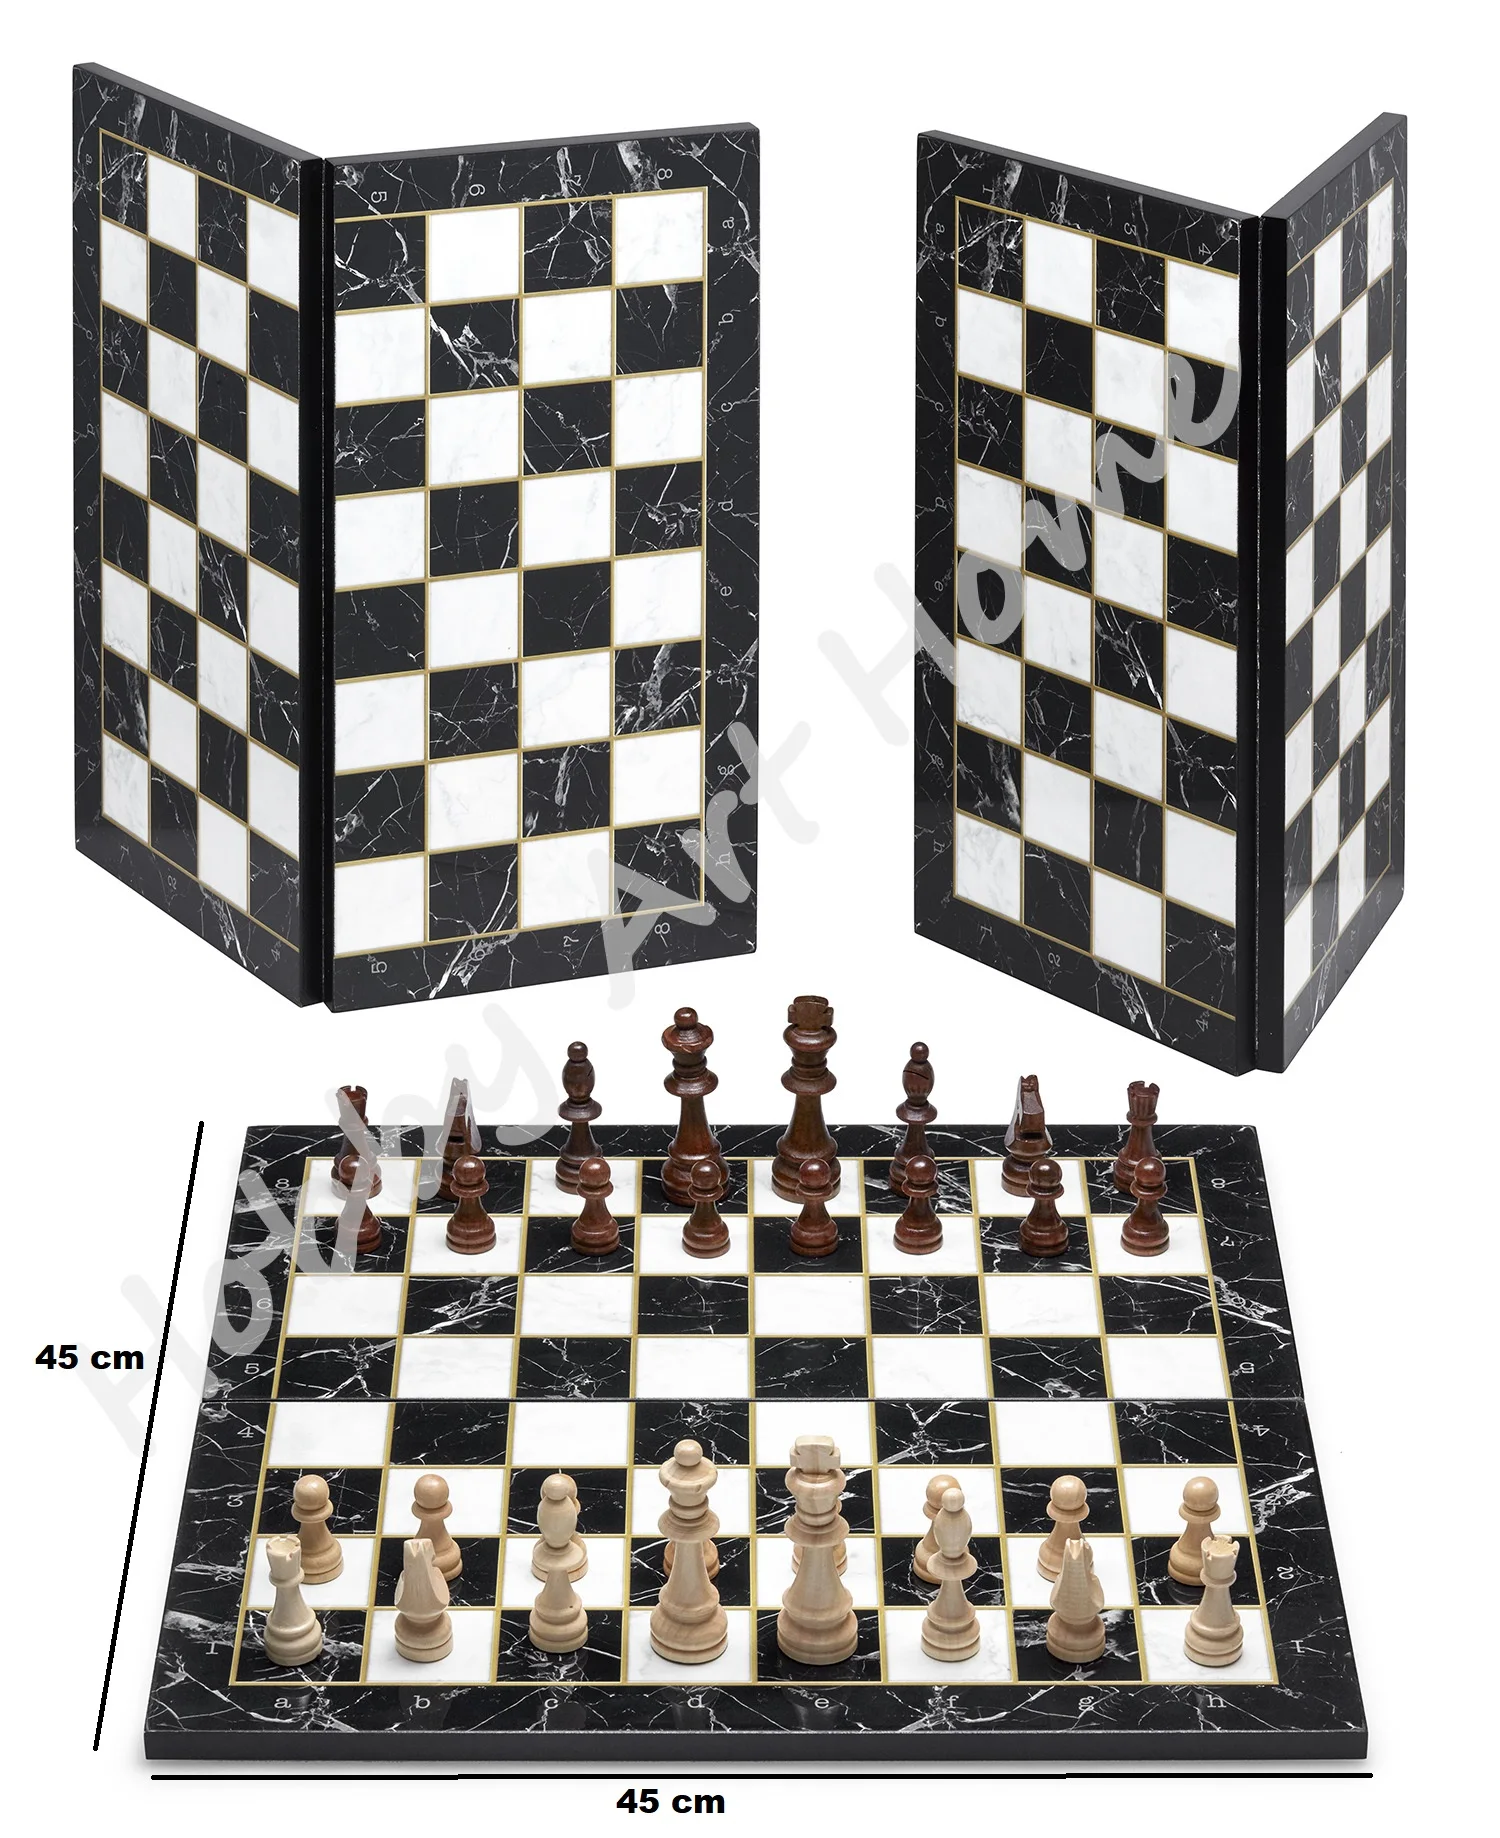 Premium Marble Chess Set 45x45 cm Wooden Folding Cloth Covered Large Top Quality Game Board Oak Wood Checkers Kids Gift Ajedrez